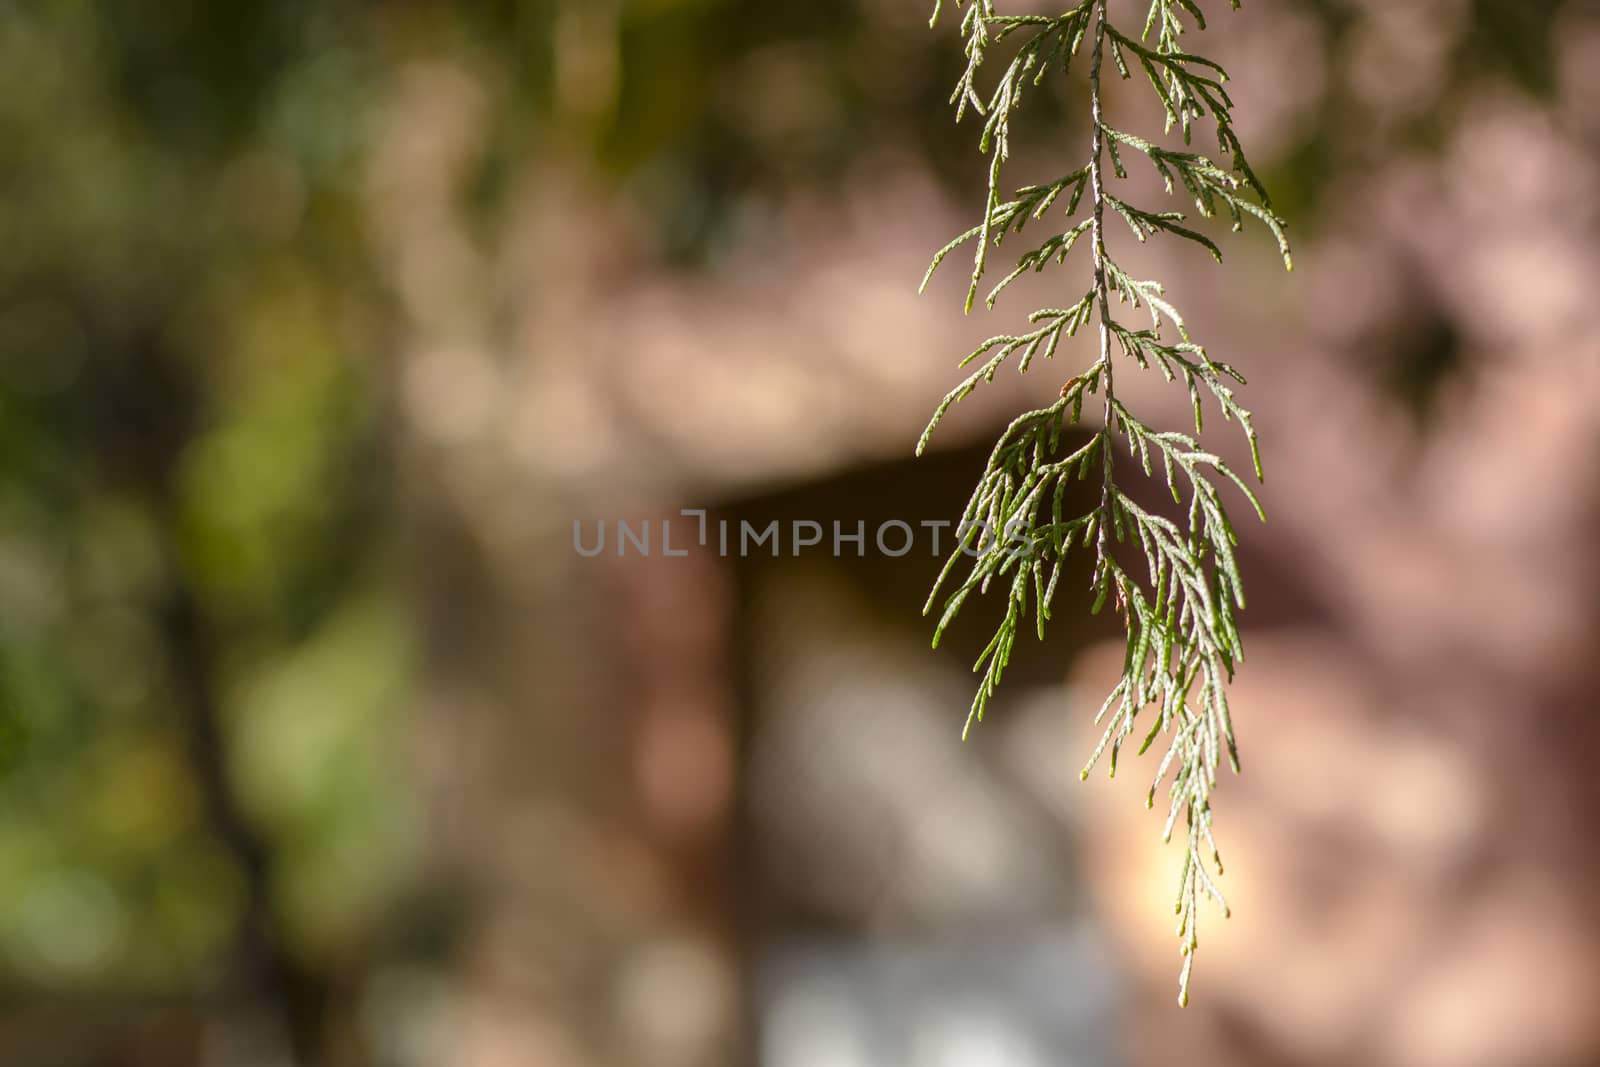 pine tree leaves and branch in the forest at sunlight, close-up and macro, bokeh background